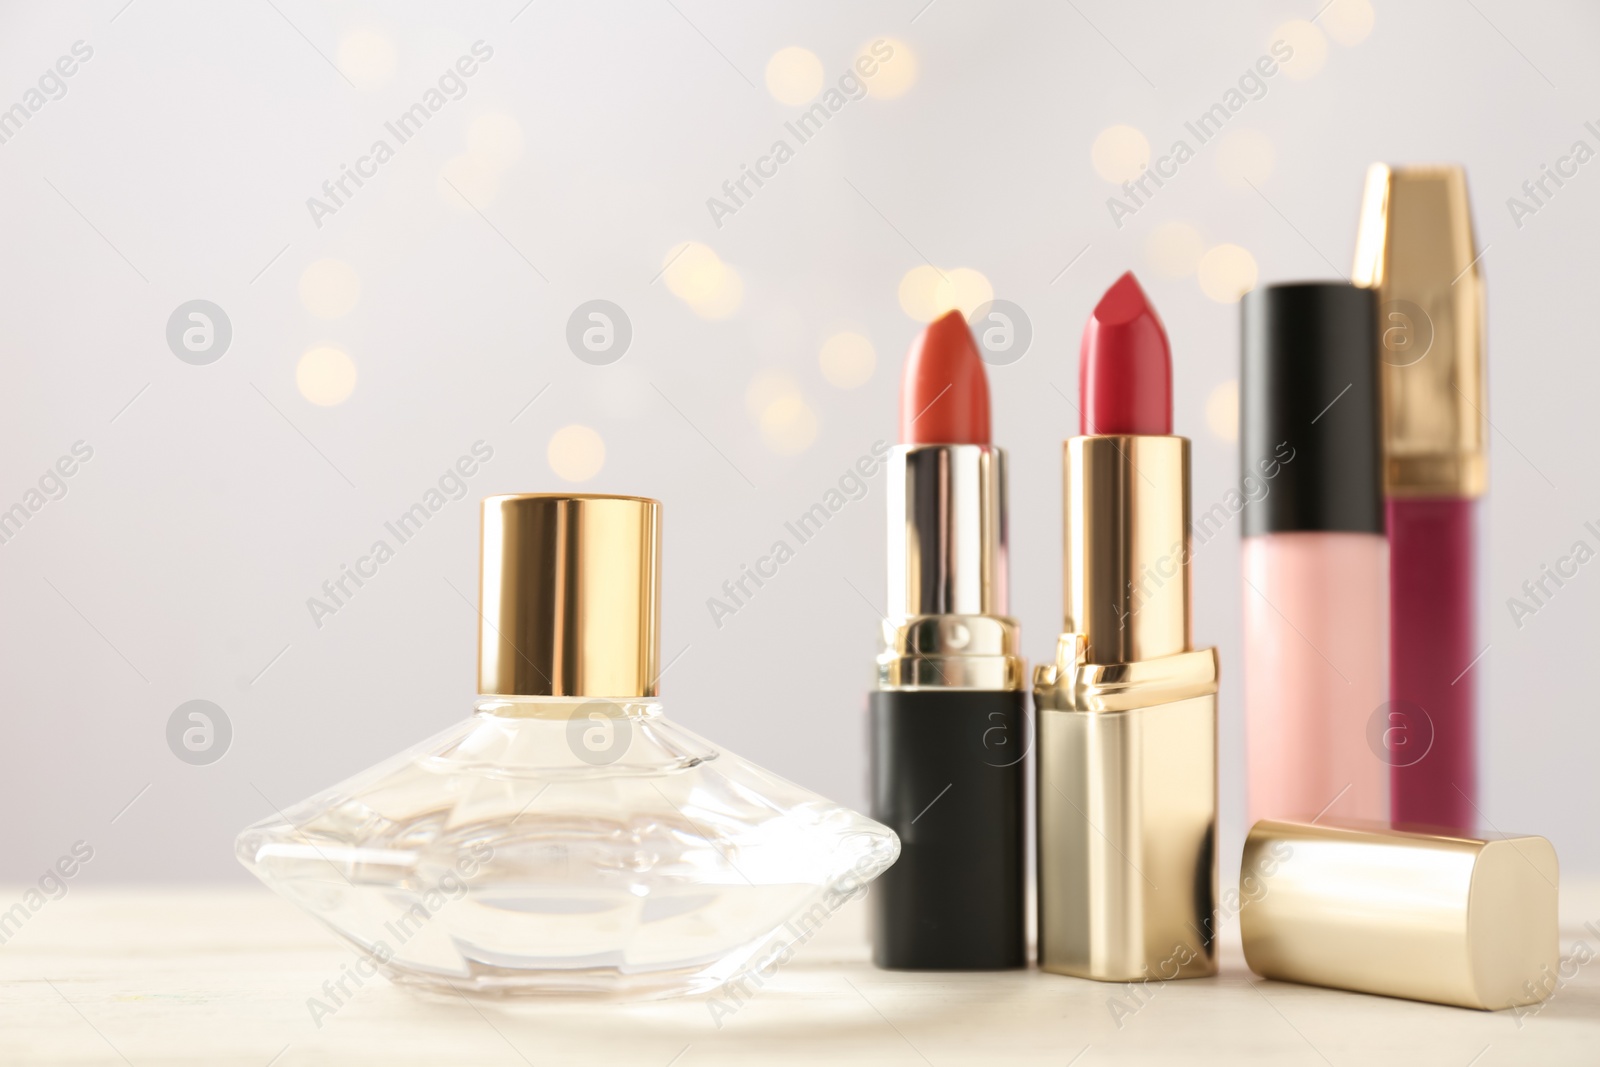 Photo of Perfume, lipsticks and lipglosses on white table